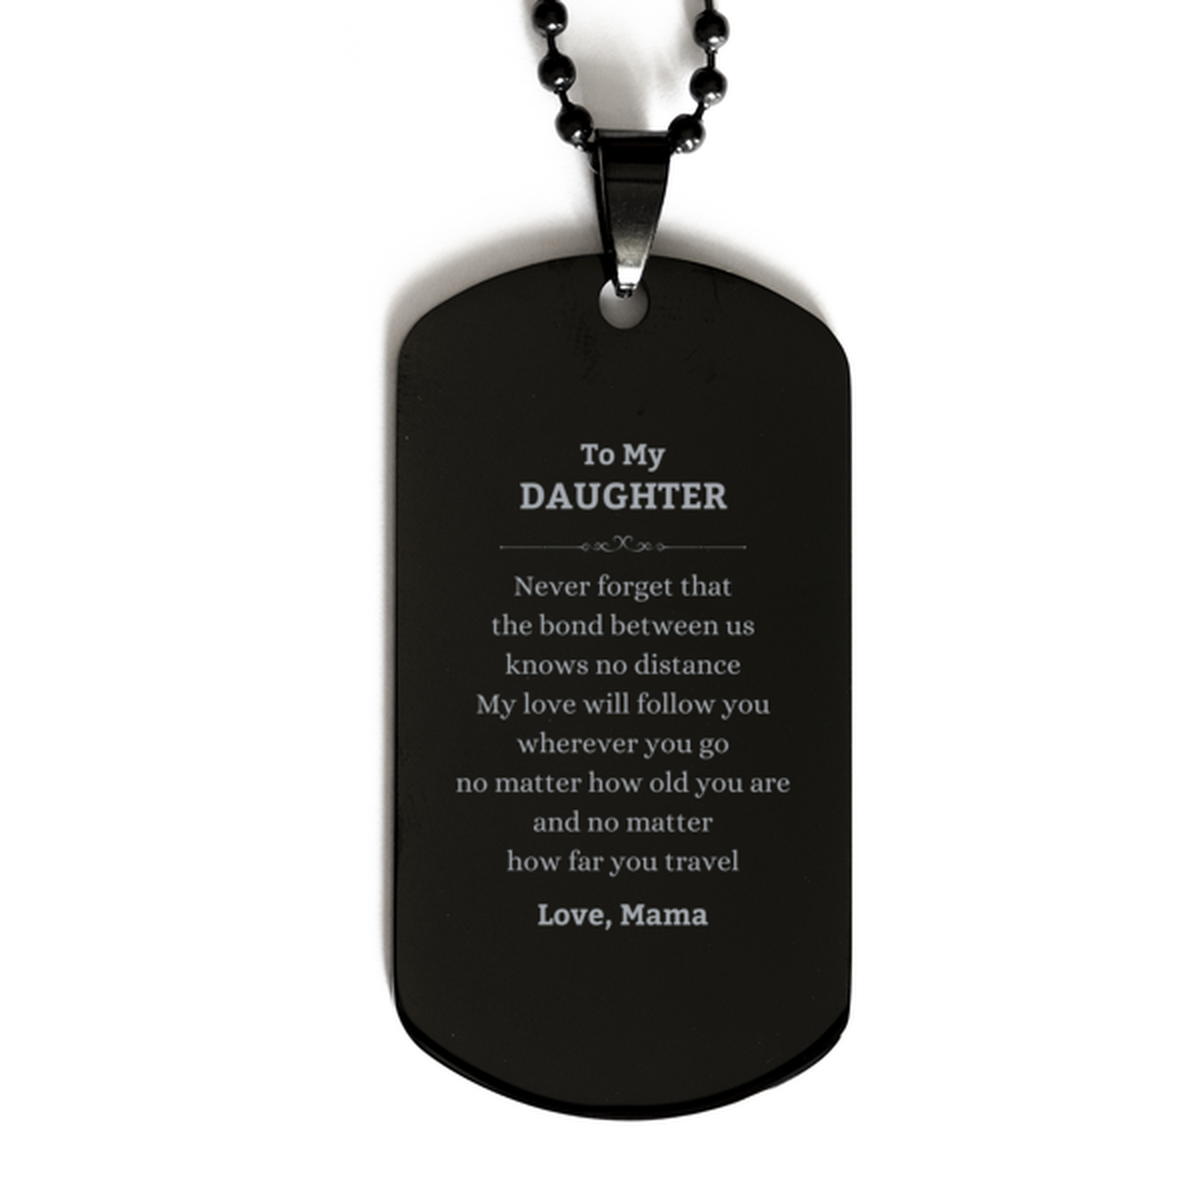 Daughter Birthday Gifts from Mama, Adjustable Black Dog Tag for Daughter Christmas Graduation Unique Gifts Daughter Never forget that the bond between us knows no distance. Love, Mama